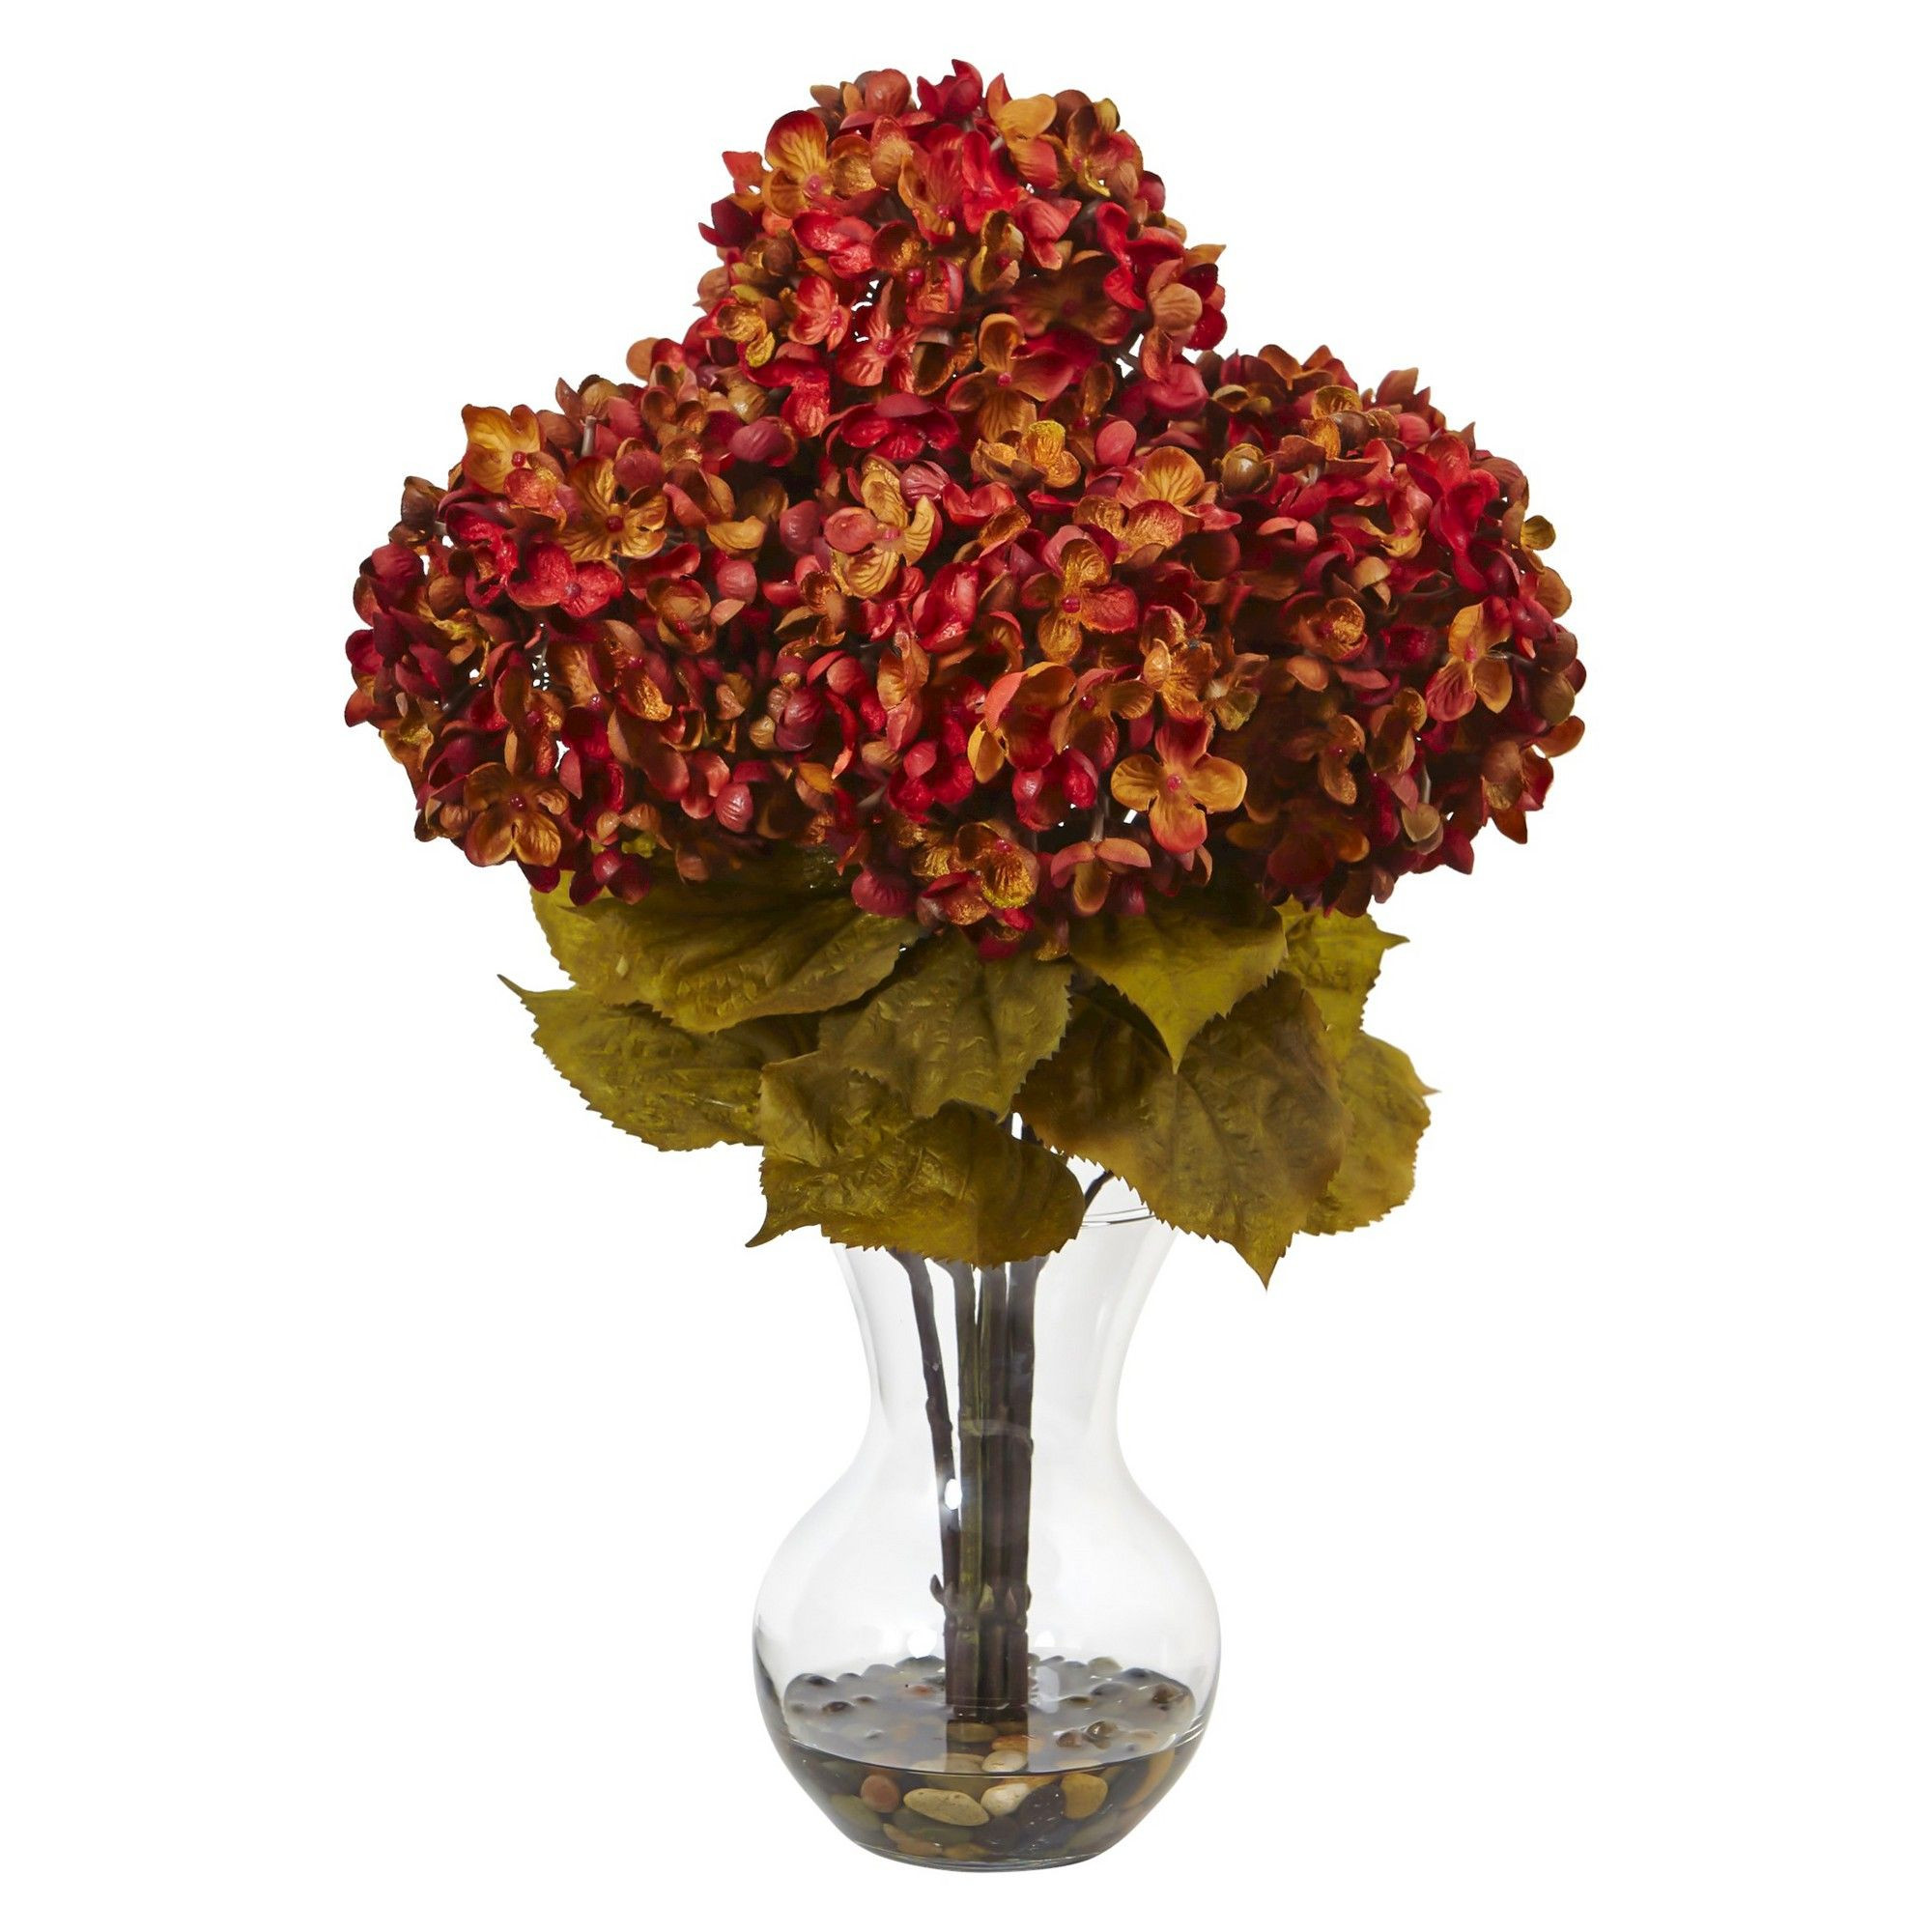 cracked glass vases wholesale of 18h hydrangea silk flower arrangement with glass vase nearly in 18h hydrangea silk flower arrangement with glass vase nearly natural red